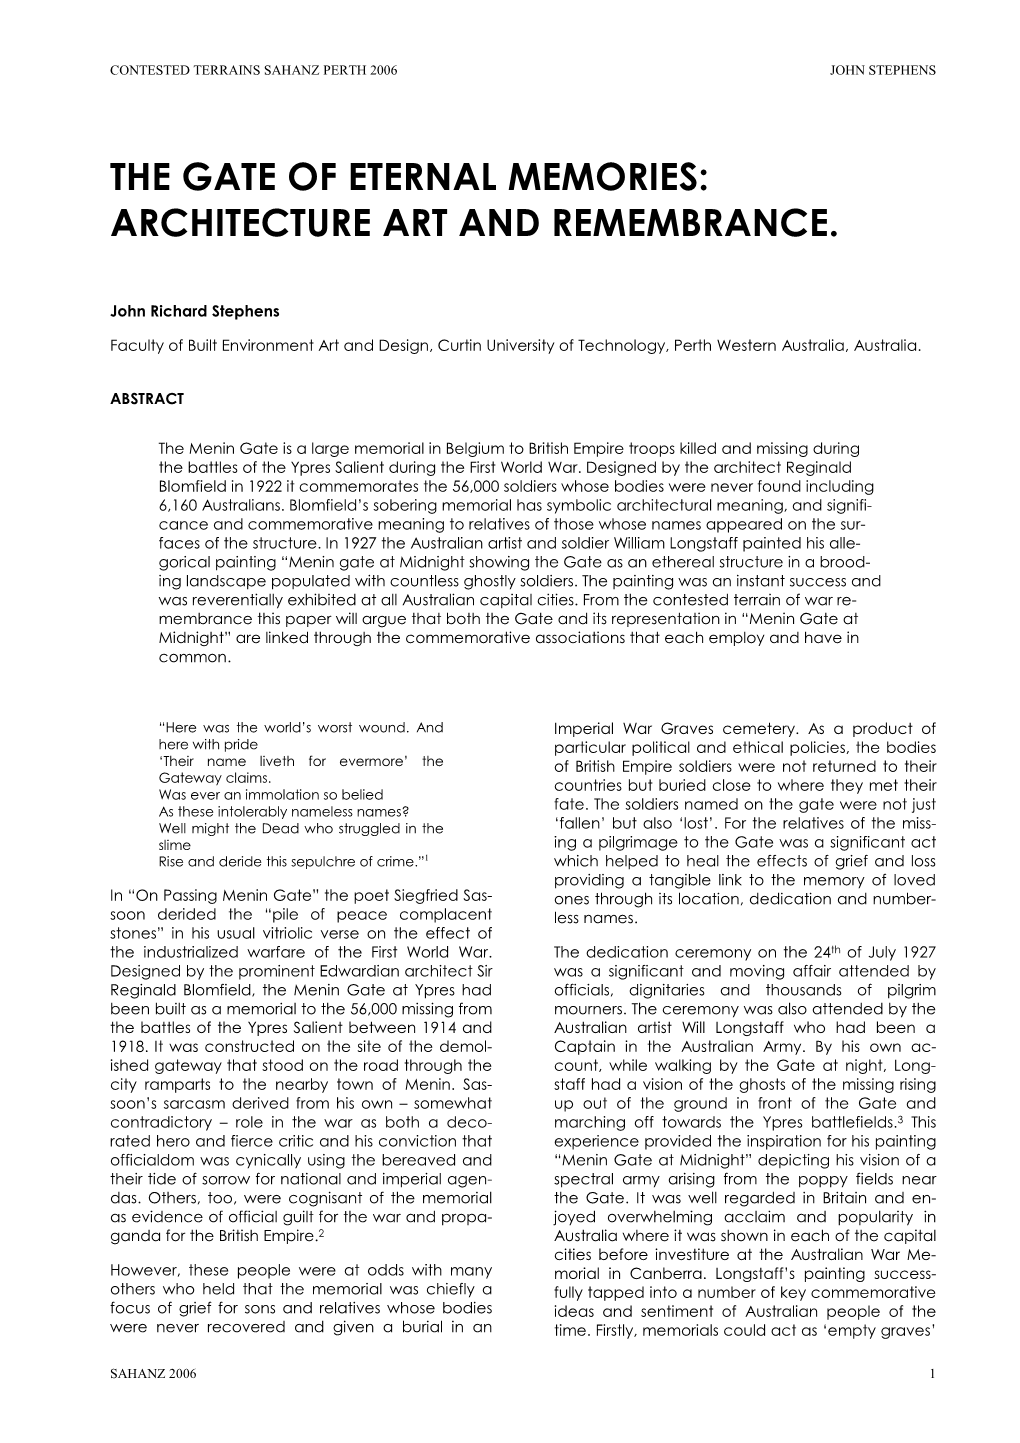 The Gate of Eternal Memories: Architecture Art and Remembrance